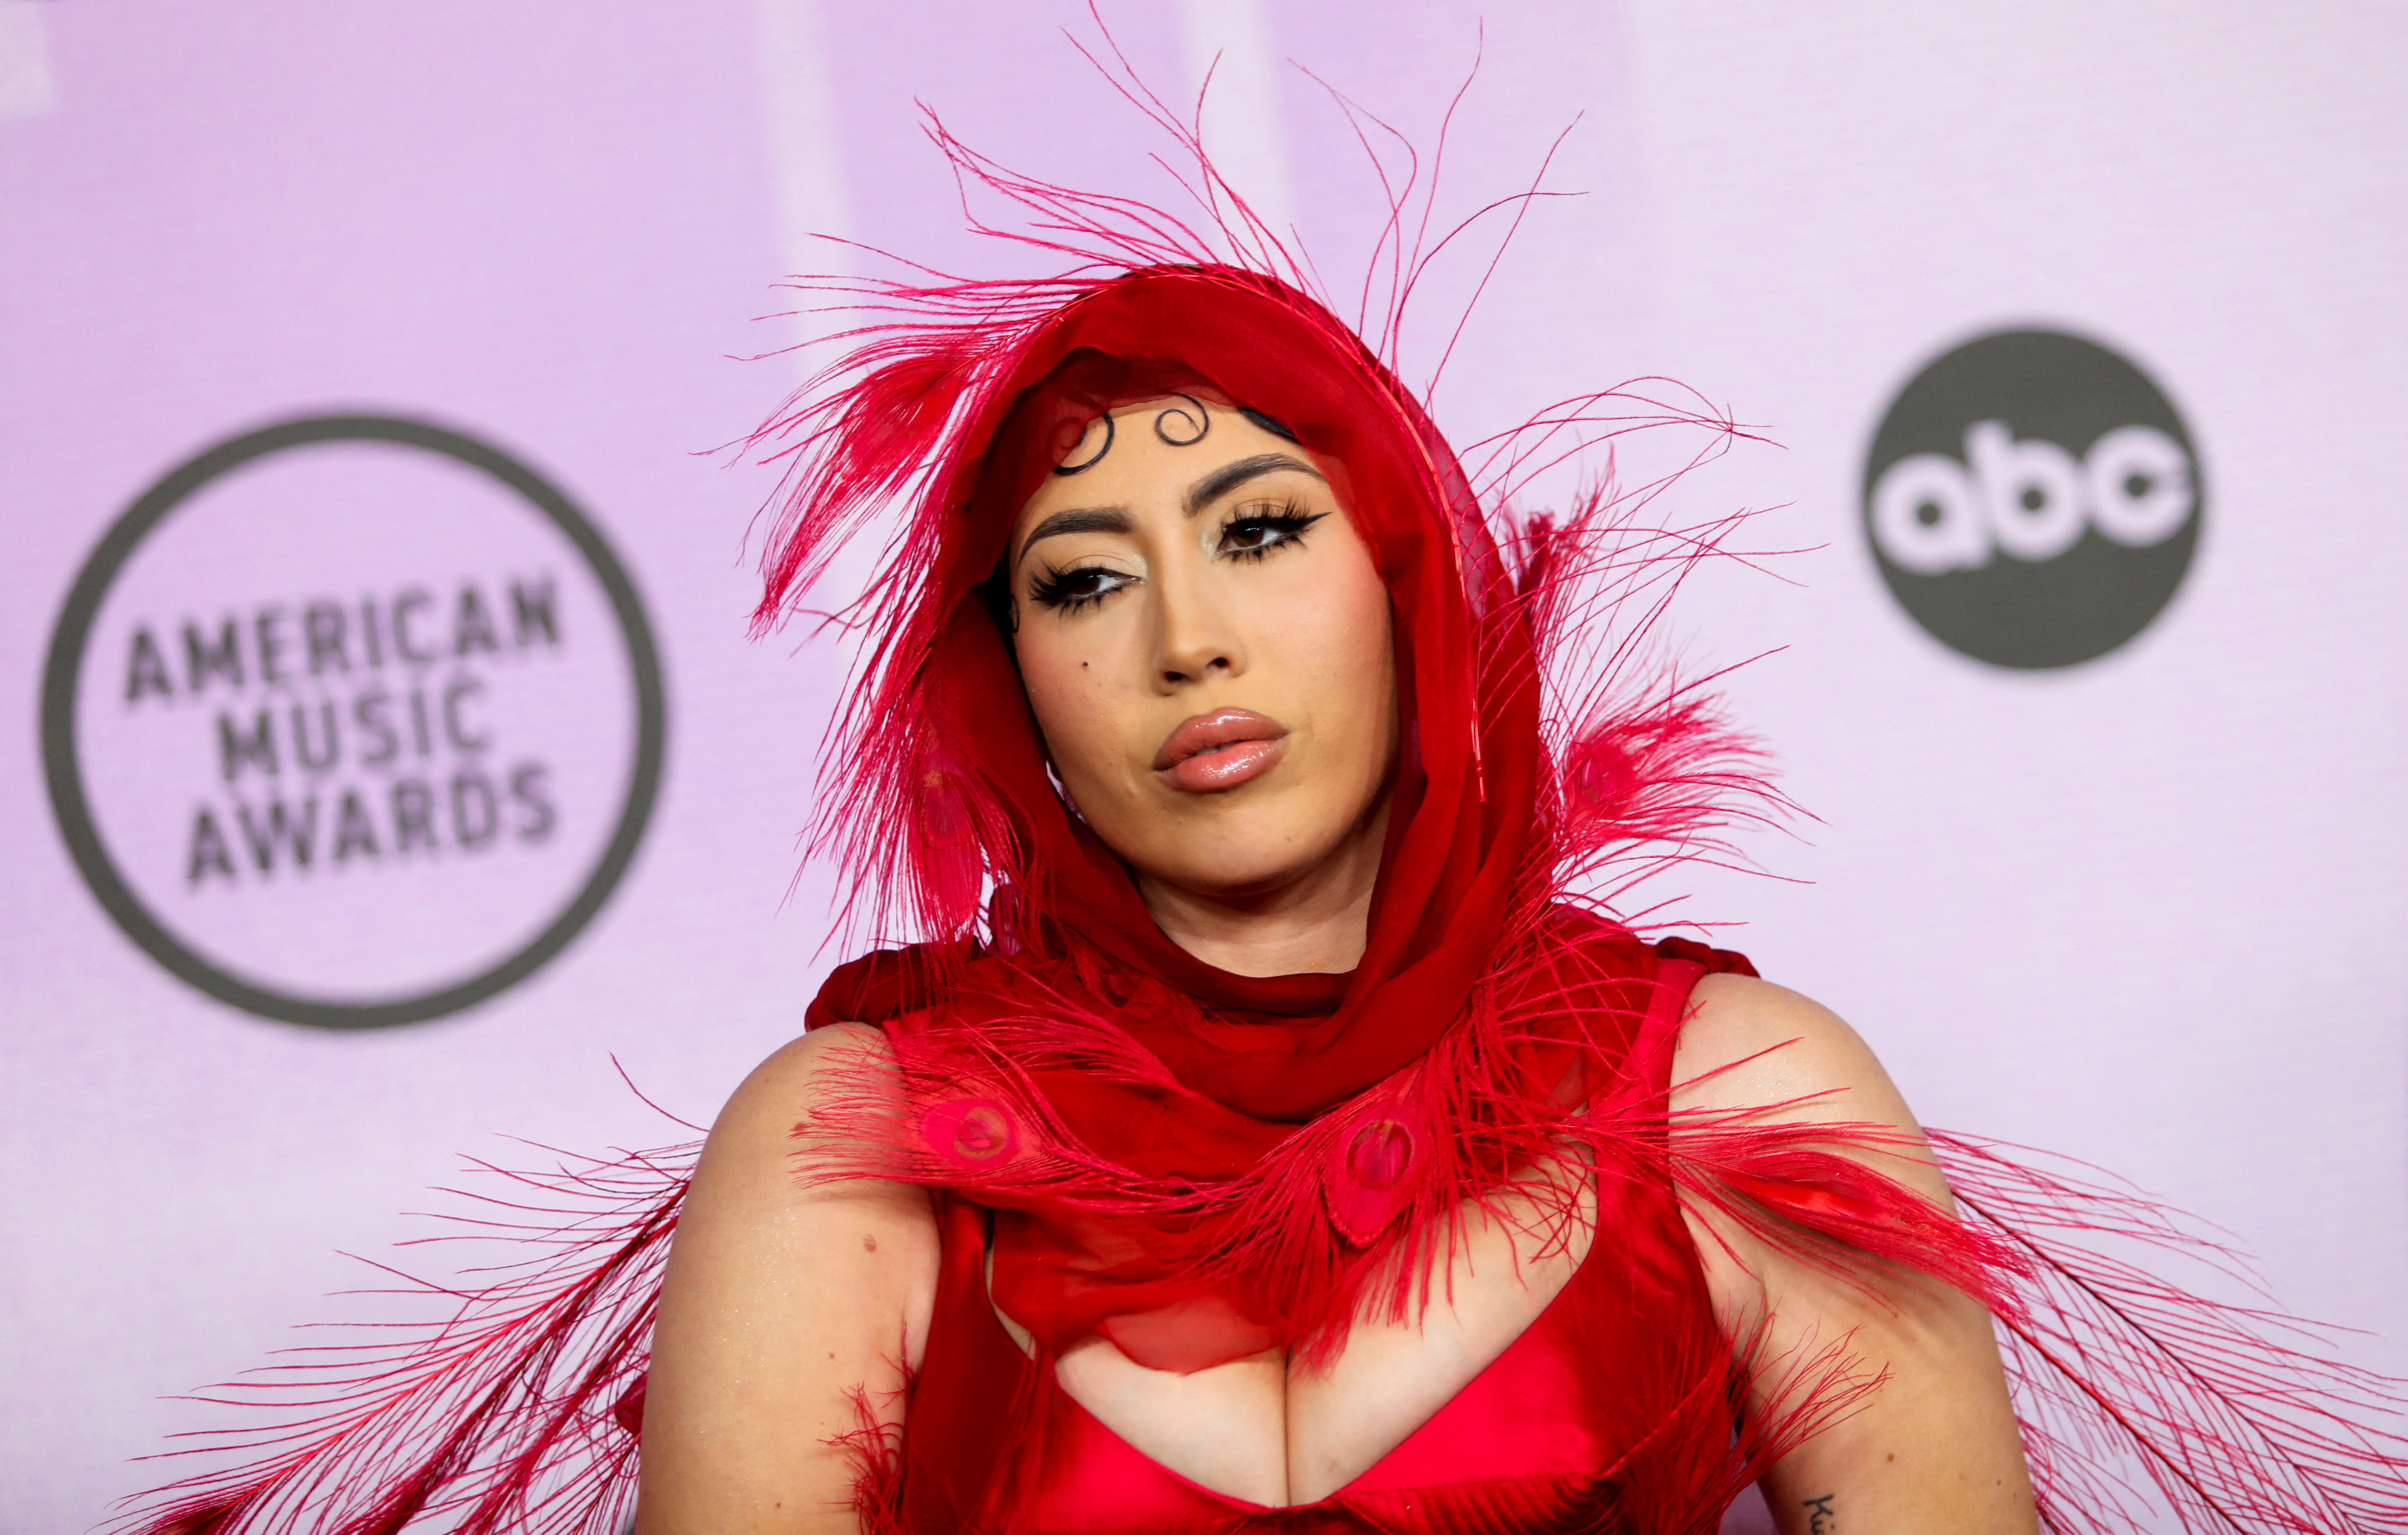 Kali Uchis arrives at the 2022 American Music Awards at the Microsoft Theater, in Los Angeles, California, U.S., November 20, 2022. REUTERS/Aude Guerrucci